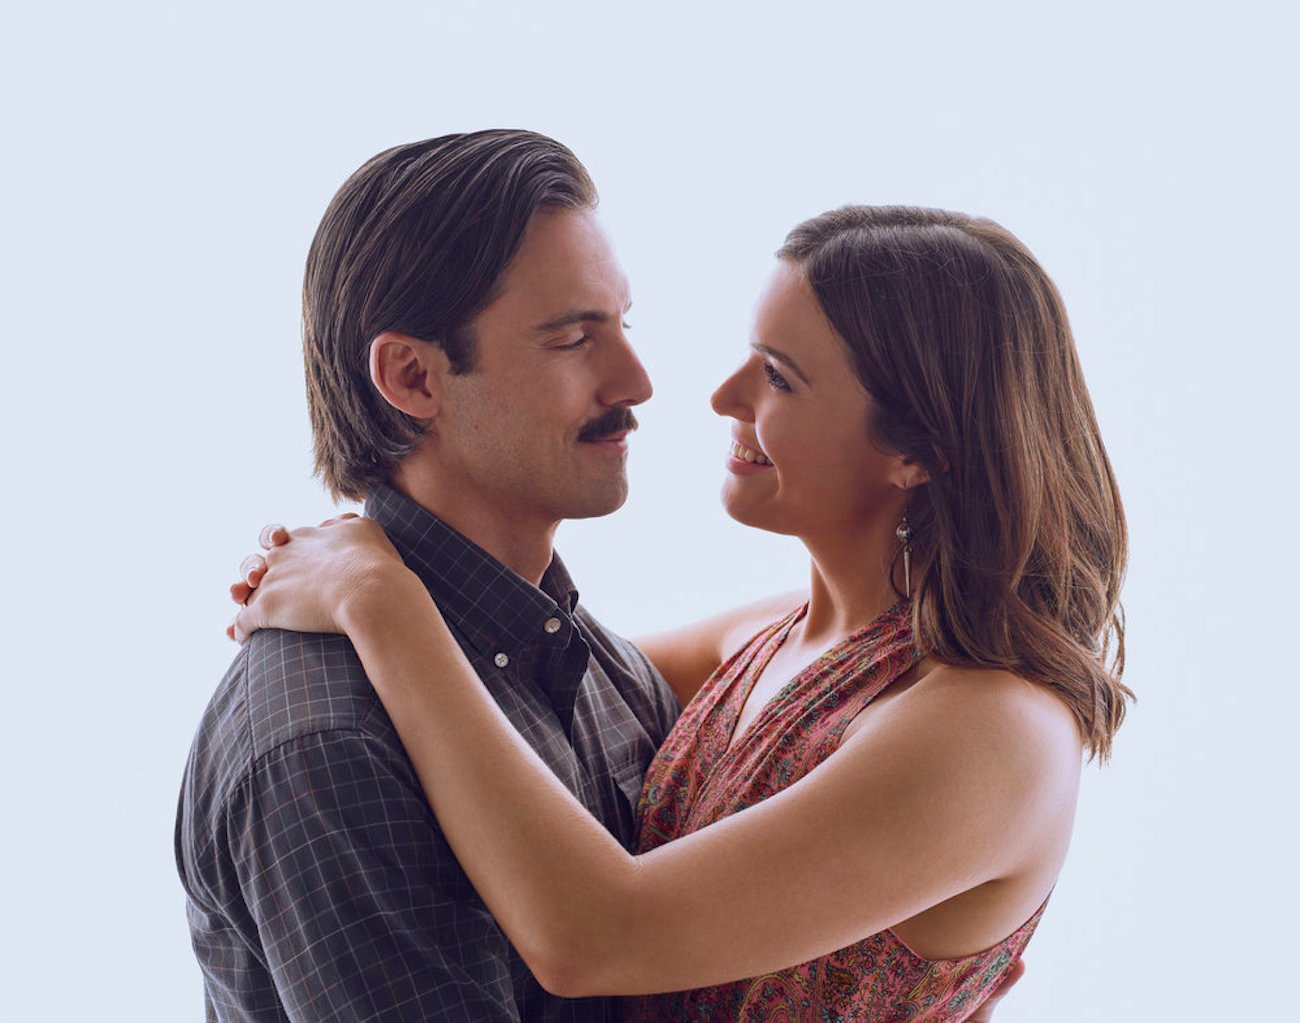 Jack Pearson (Milo Ventimiglia) and Rebecca Pearson (Mandy Moore) pose looking at each other in 'This Is Us'